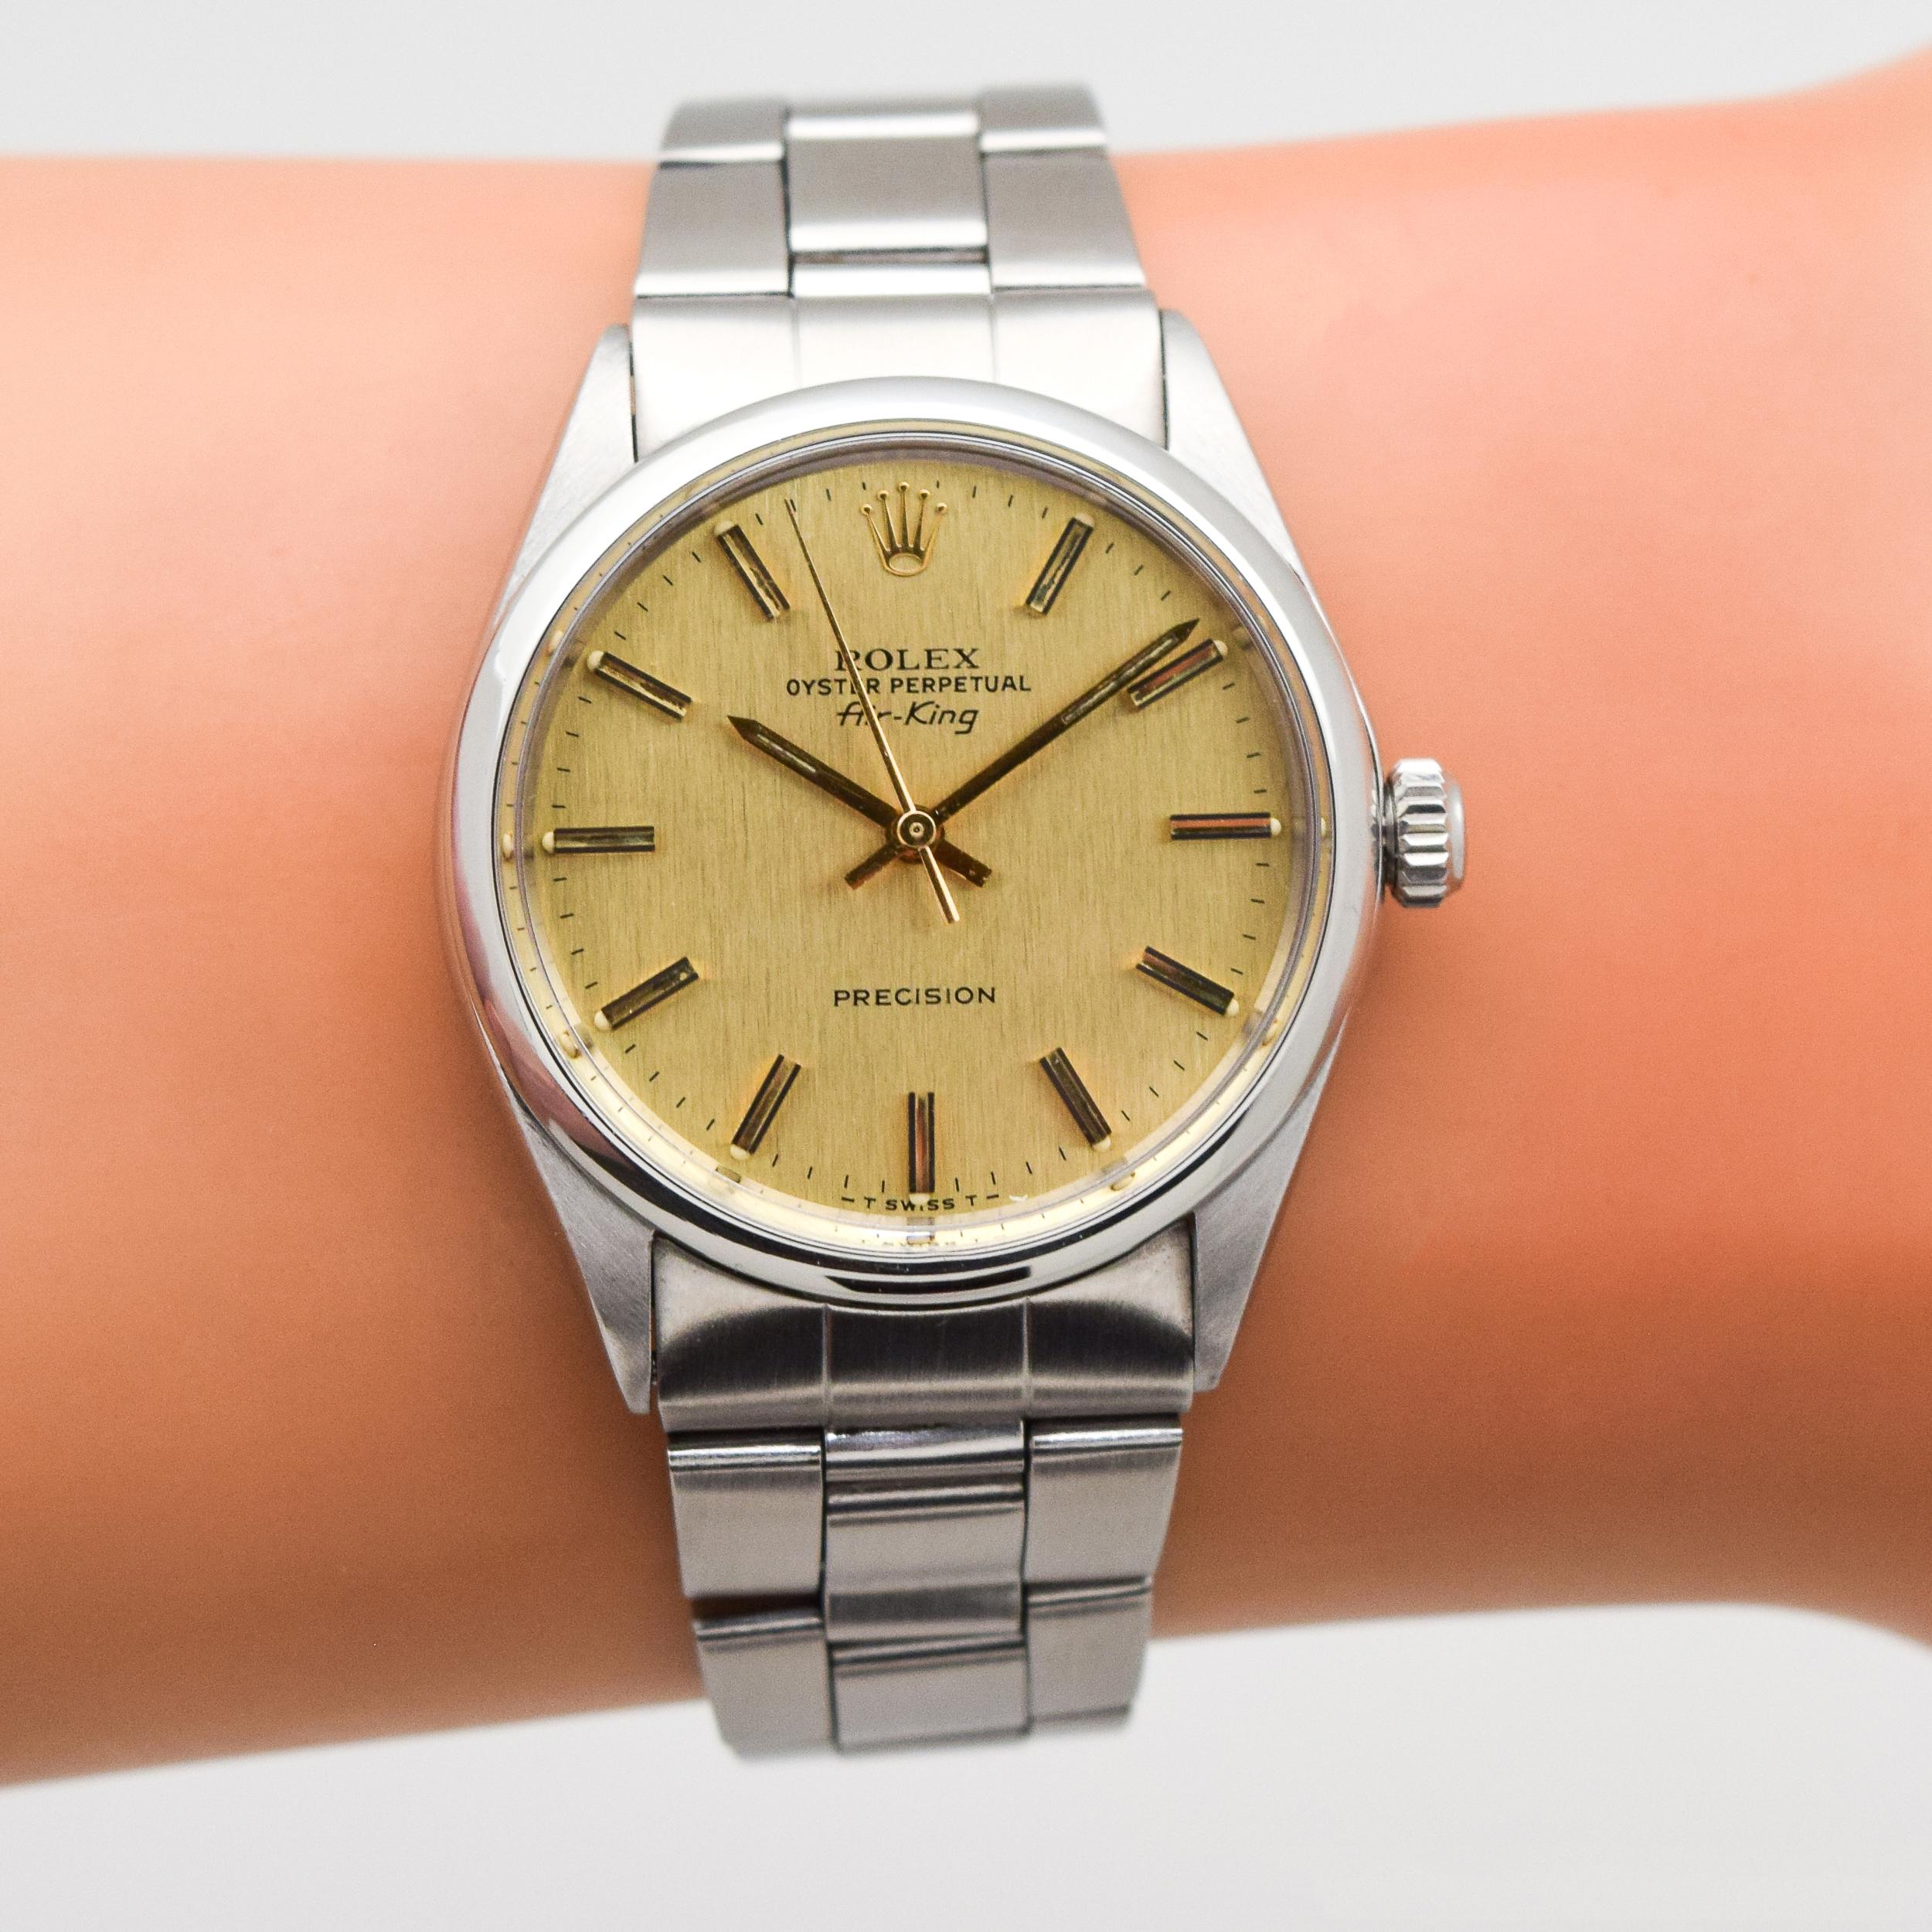 Vintage Rolex Air-King Stainless Steel Watch, 1972 For Sale 3